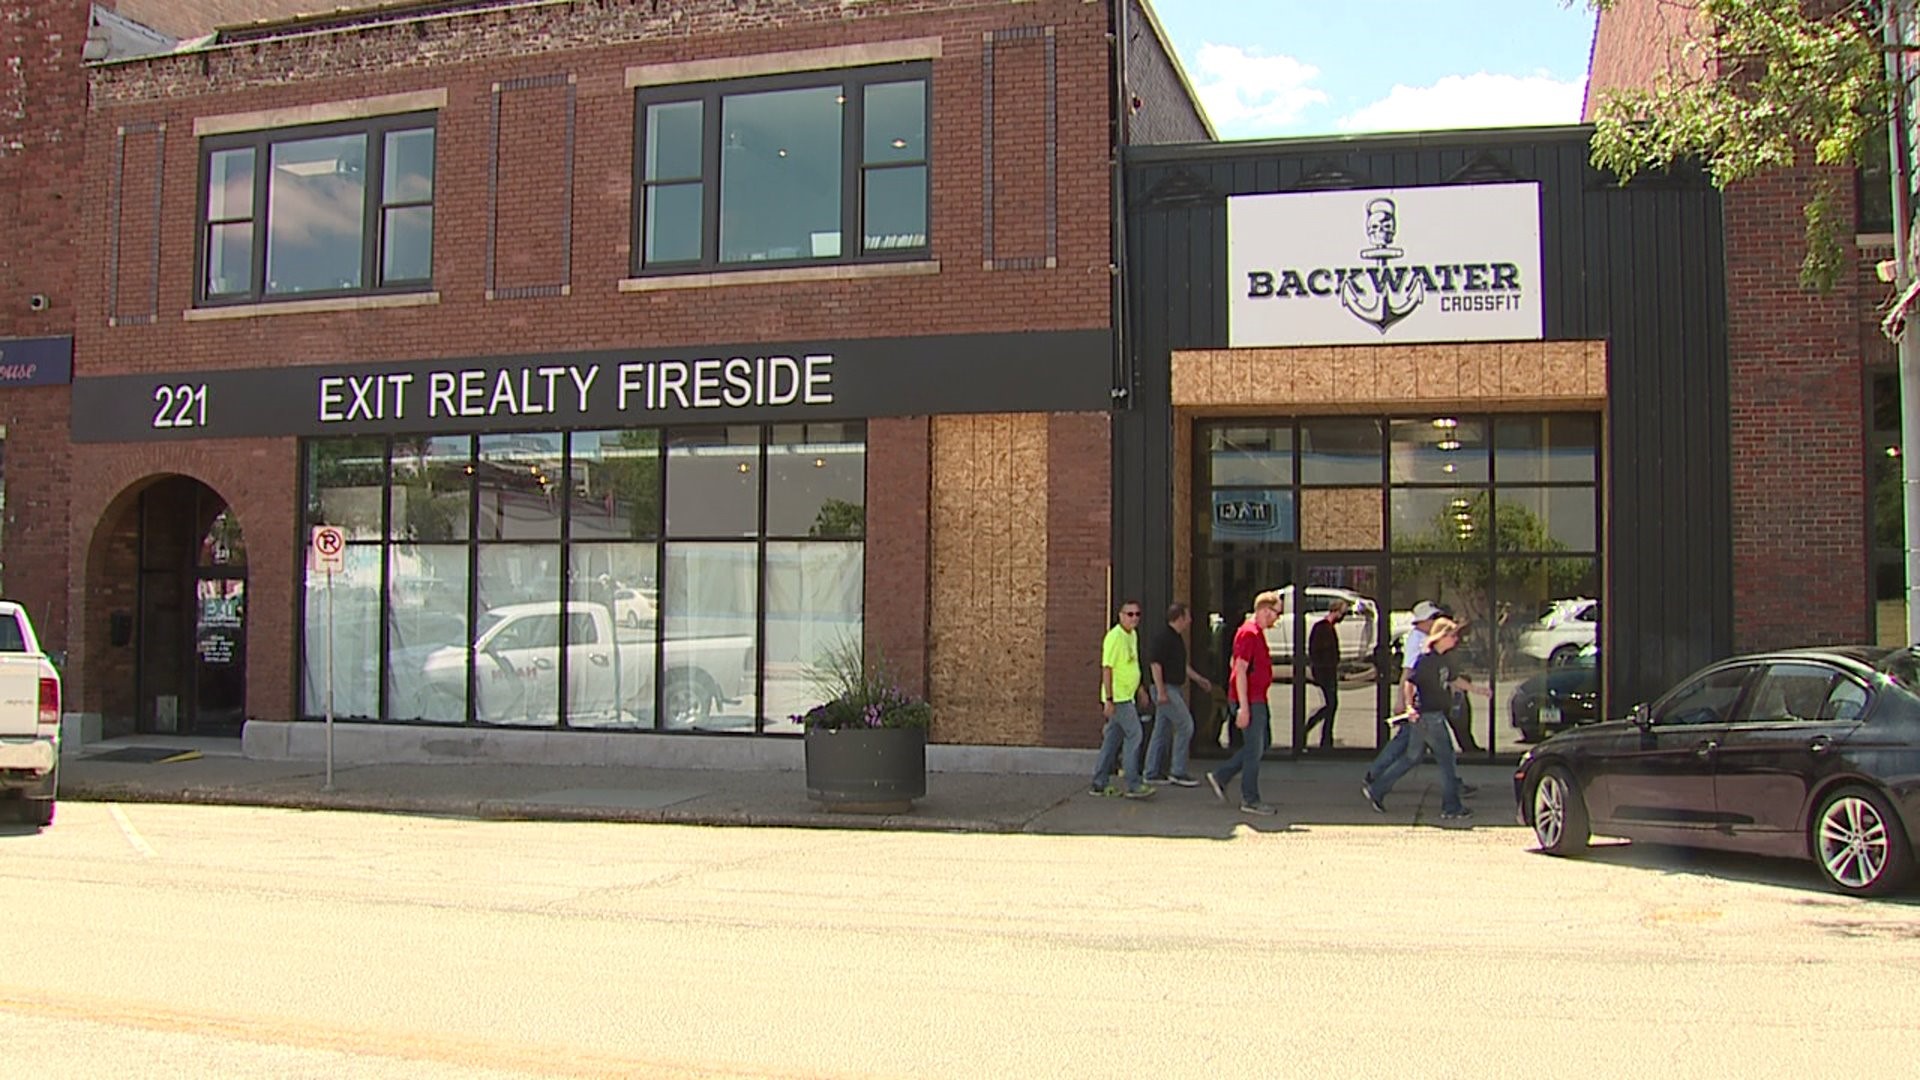 Downtown Davenport businesses use flood to redevelop